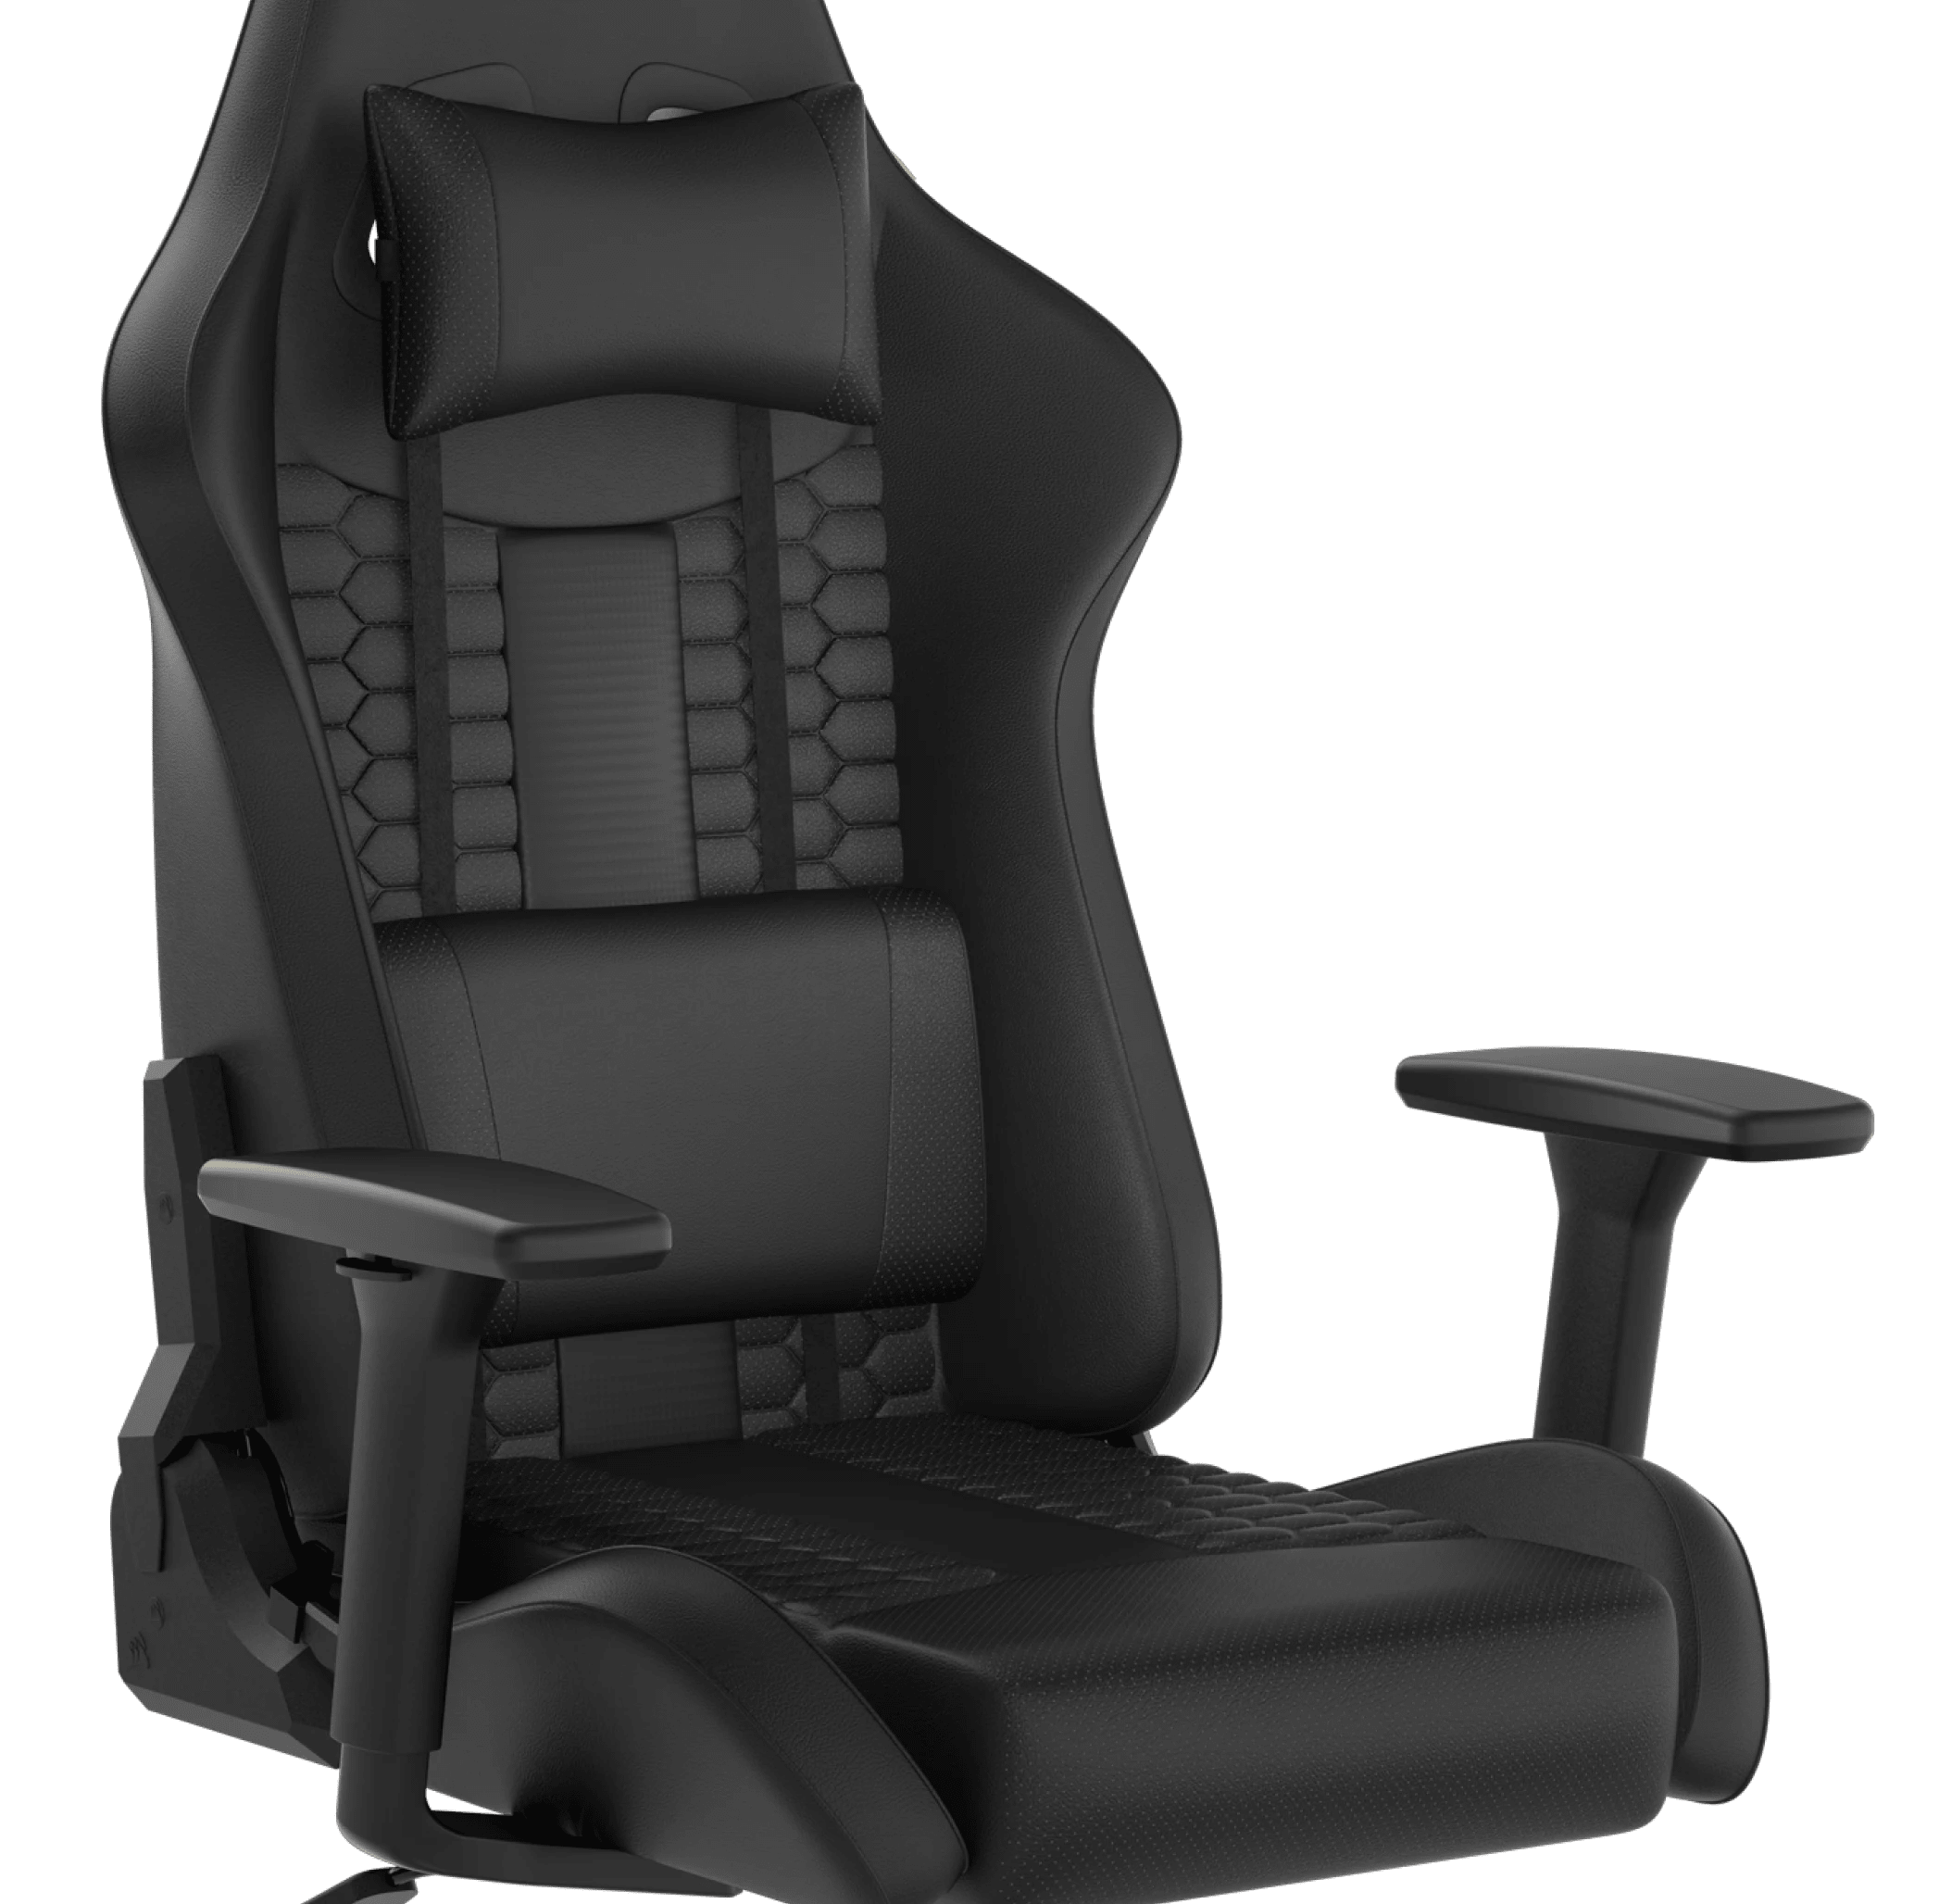 TC100 RELAXED Gaming Chair Black/Black - Leatherette